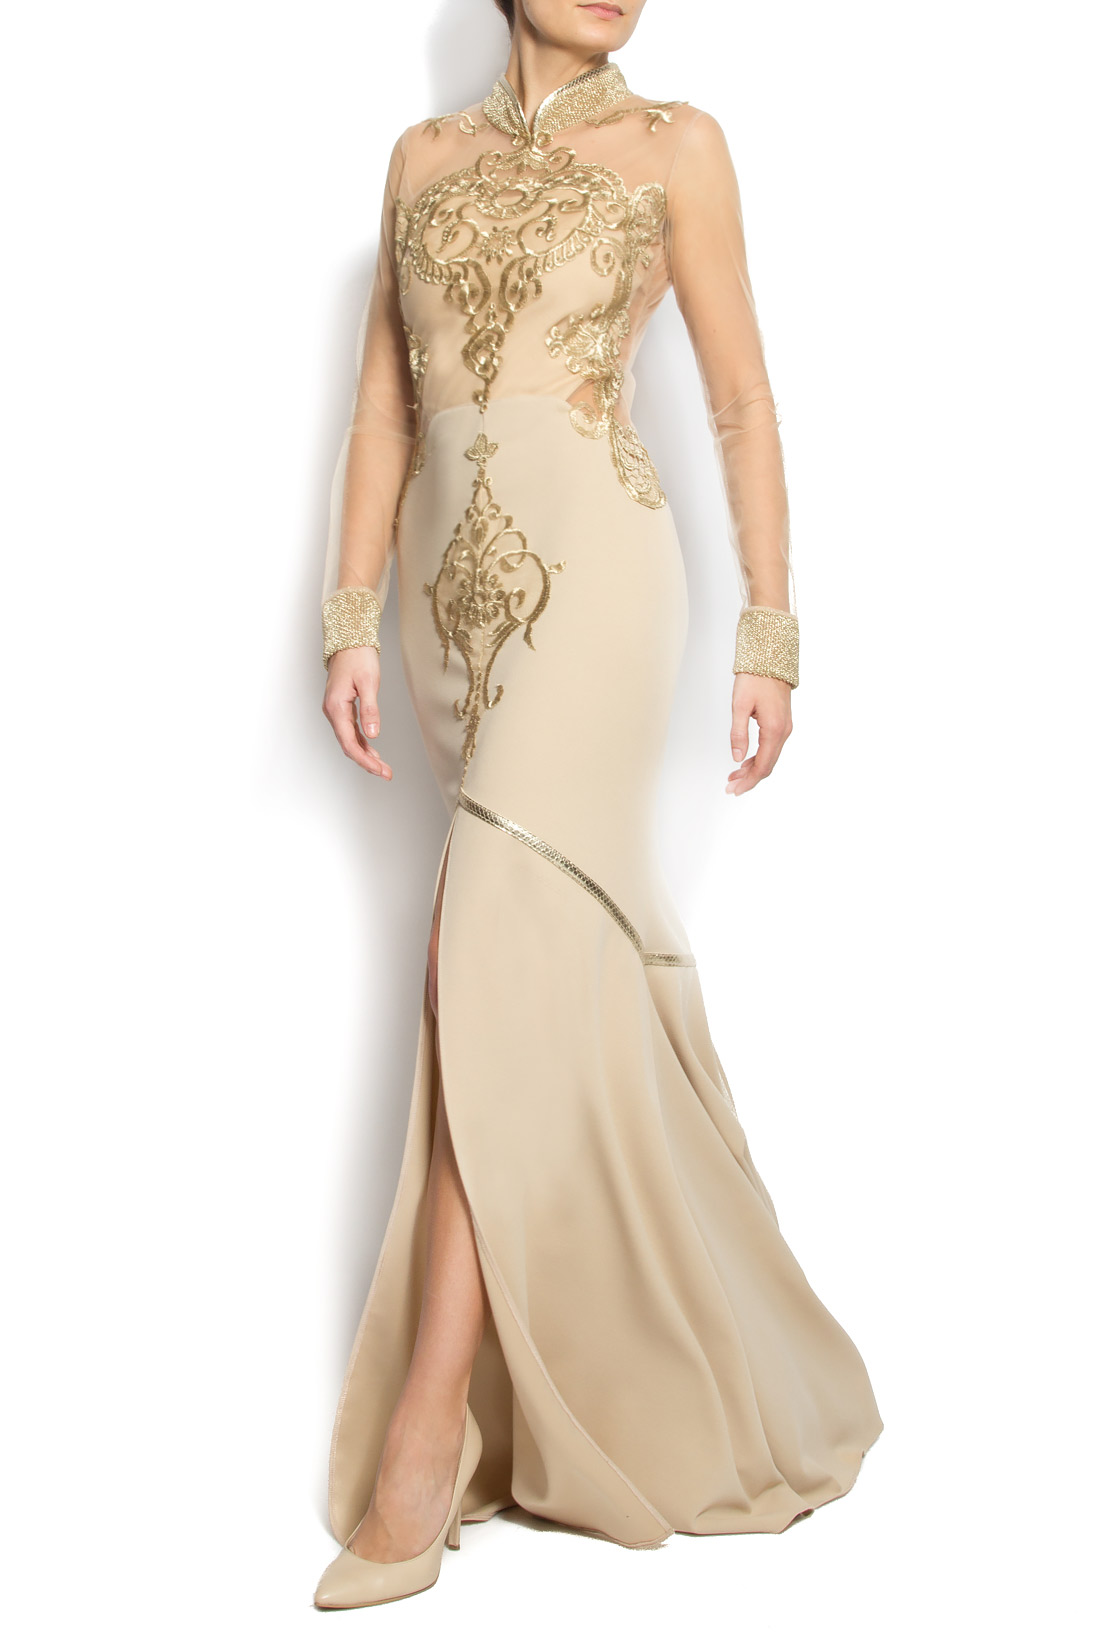 Hand embroidered crepe gown Anca si Silvia Negulescu image 1